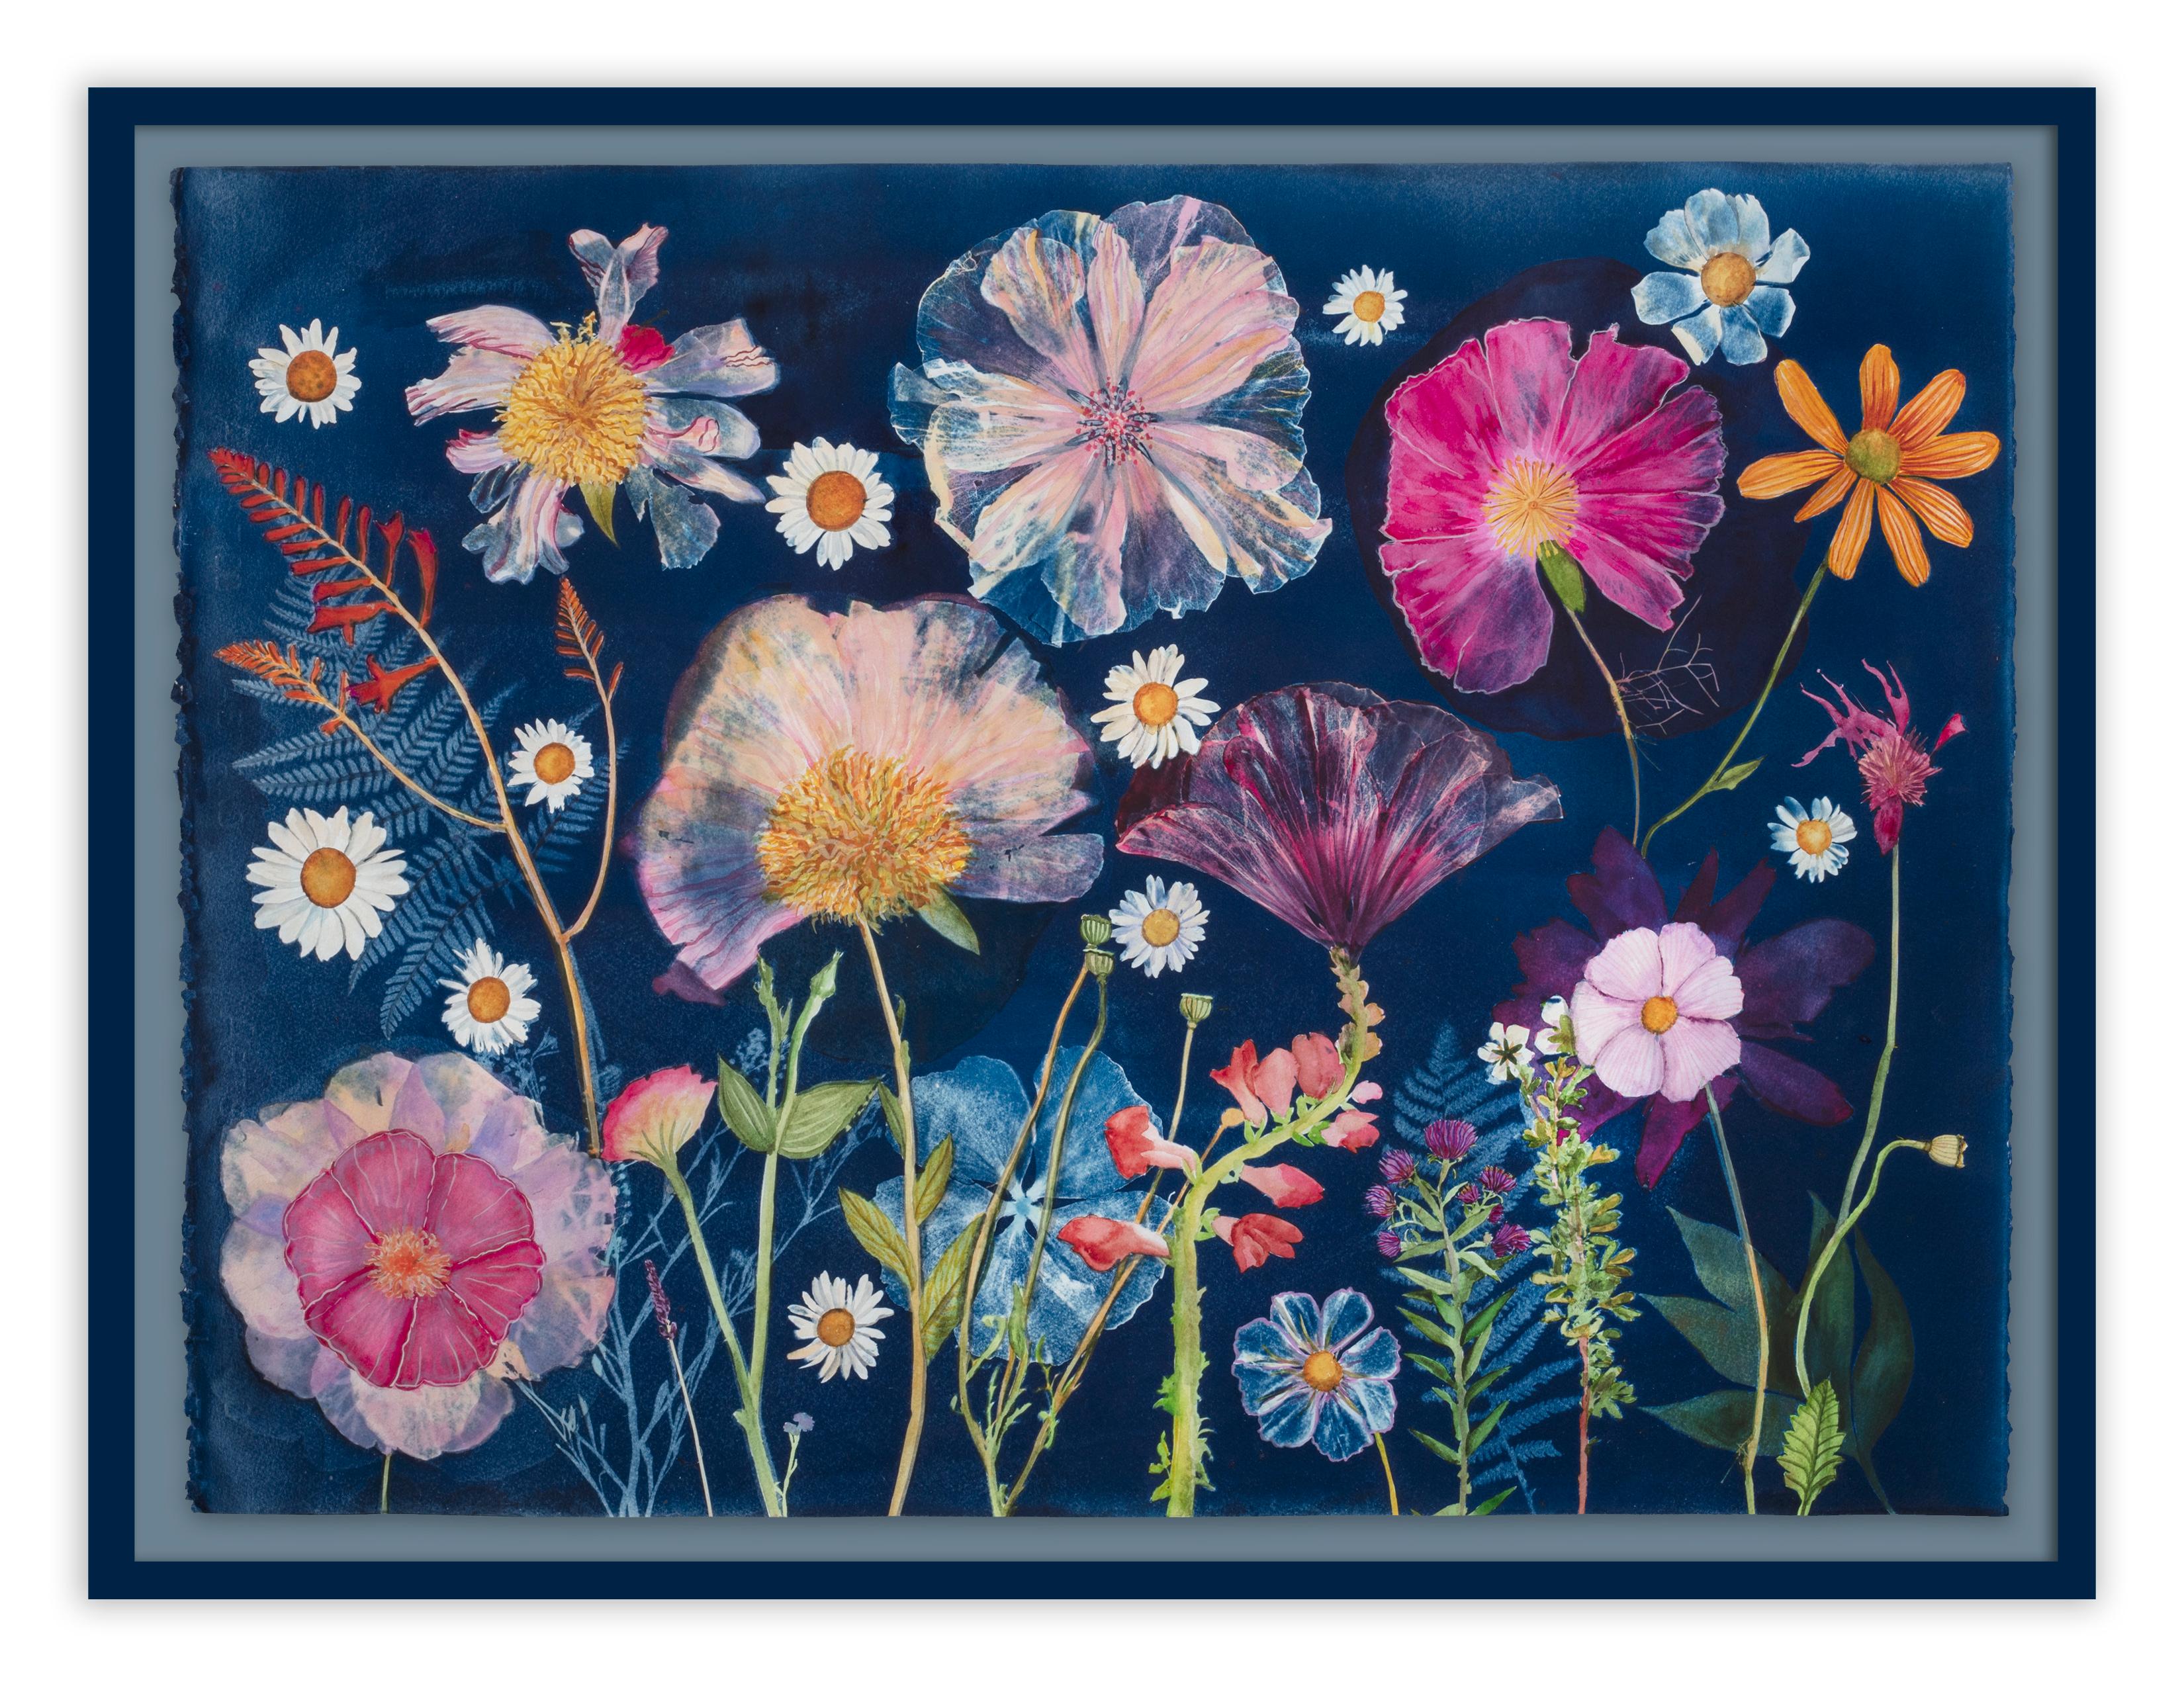 In this horizontal work in watercolor, gouache, and cyanotype on cotton Fabriano paper, meticulously detailed flowers, including hibiscus, peonies, daisies and montbretia are colorful and luminous in shades of light pink, vibrant fuchsia, bright